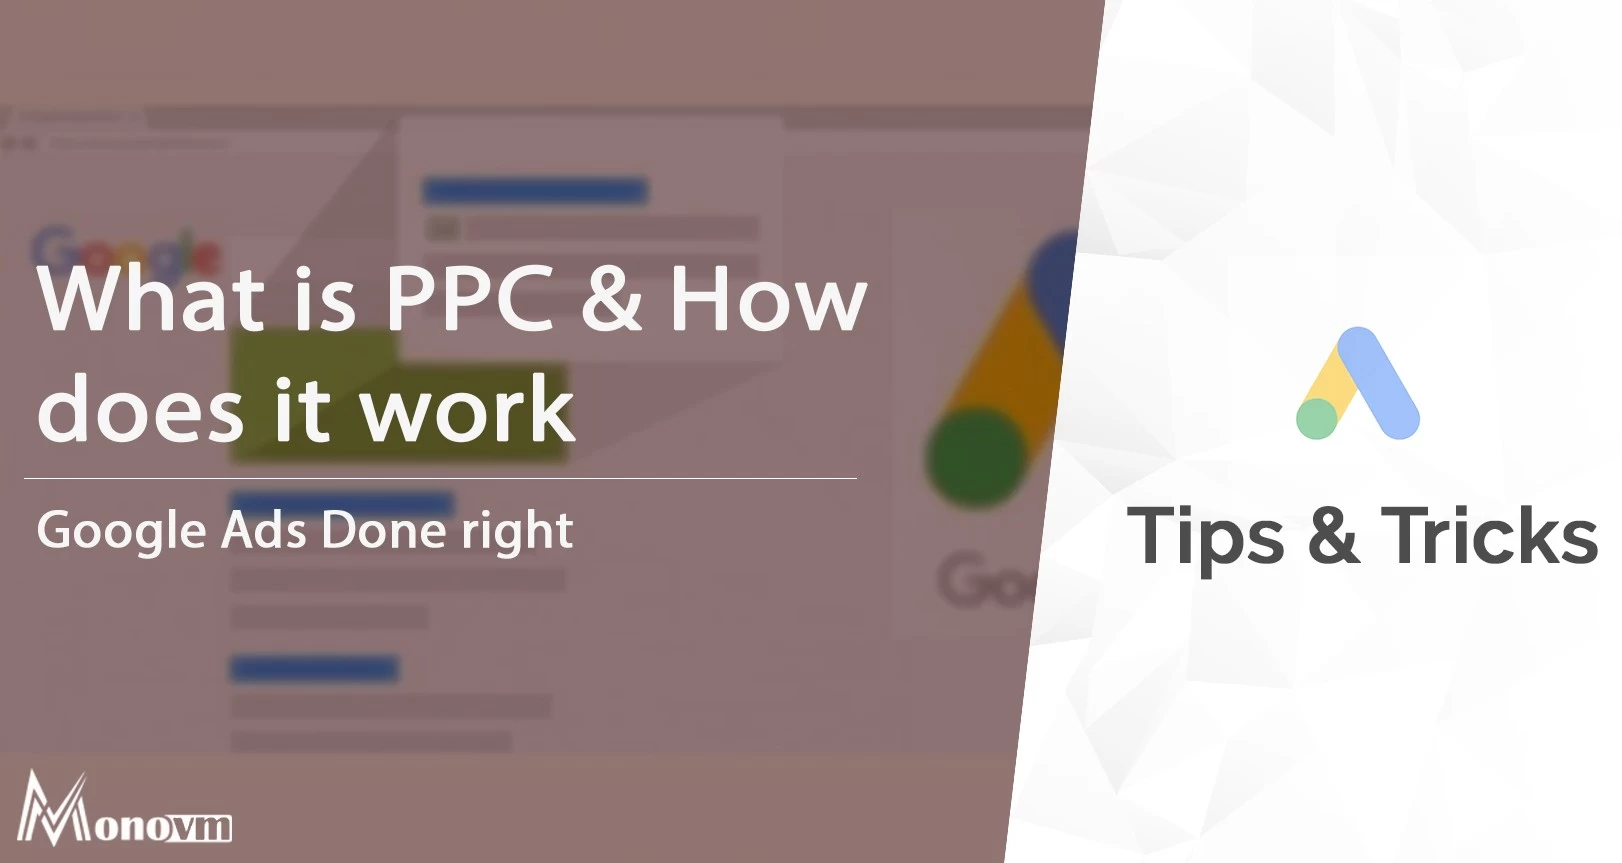 What Is PPC, And How does PPC Work?